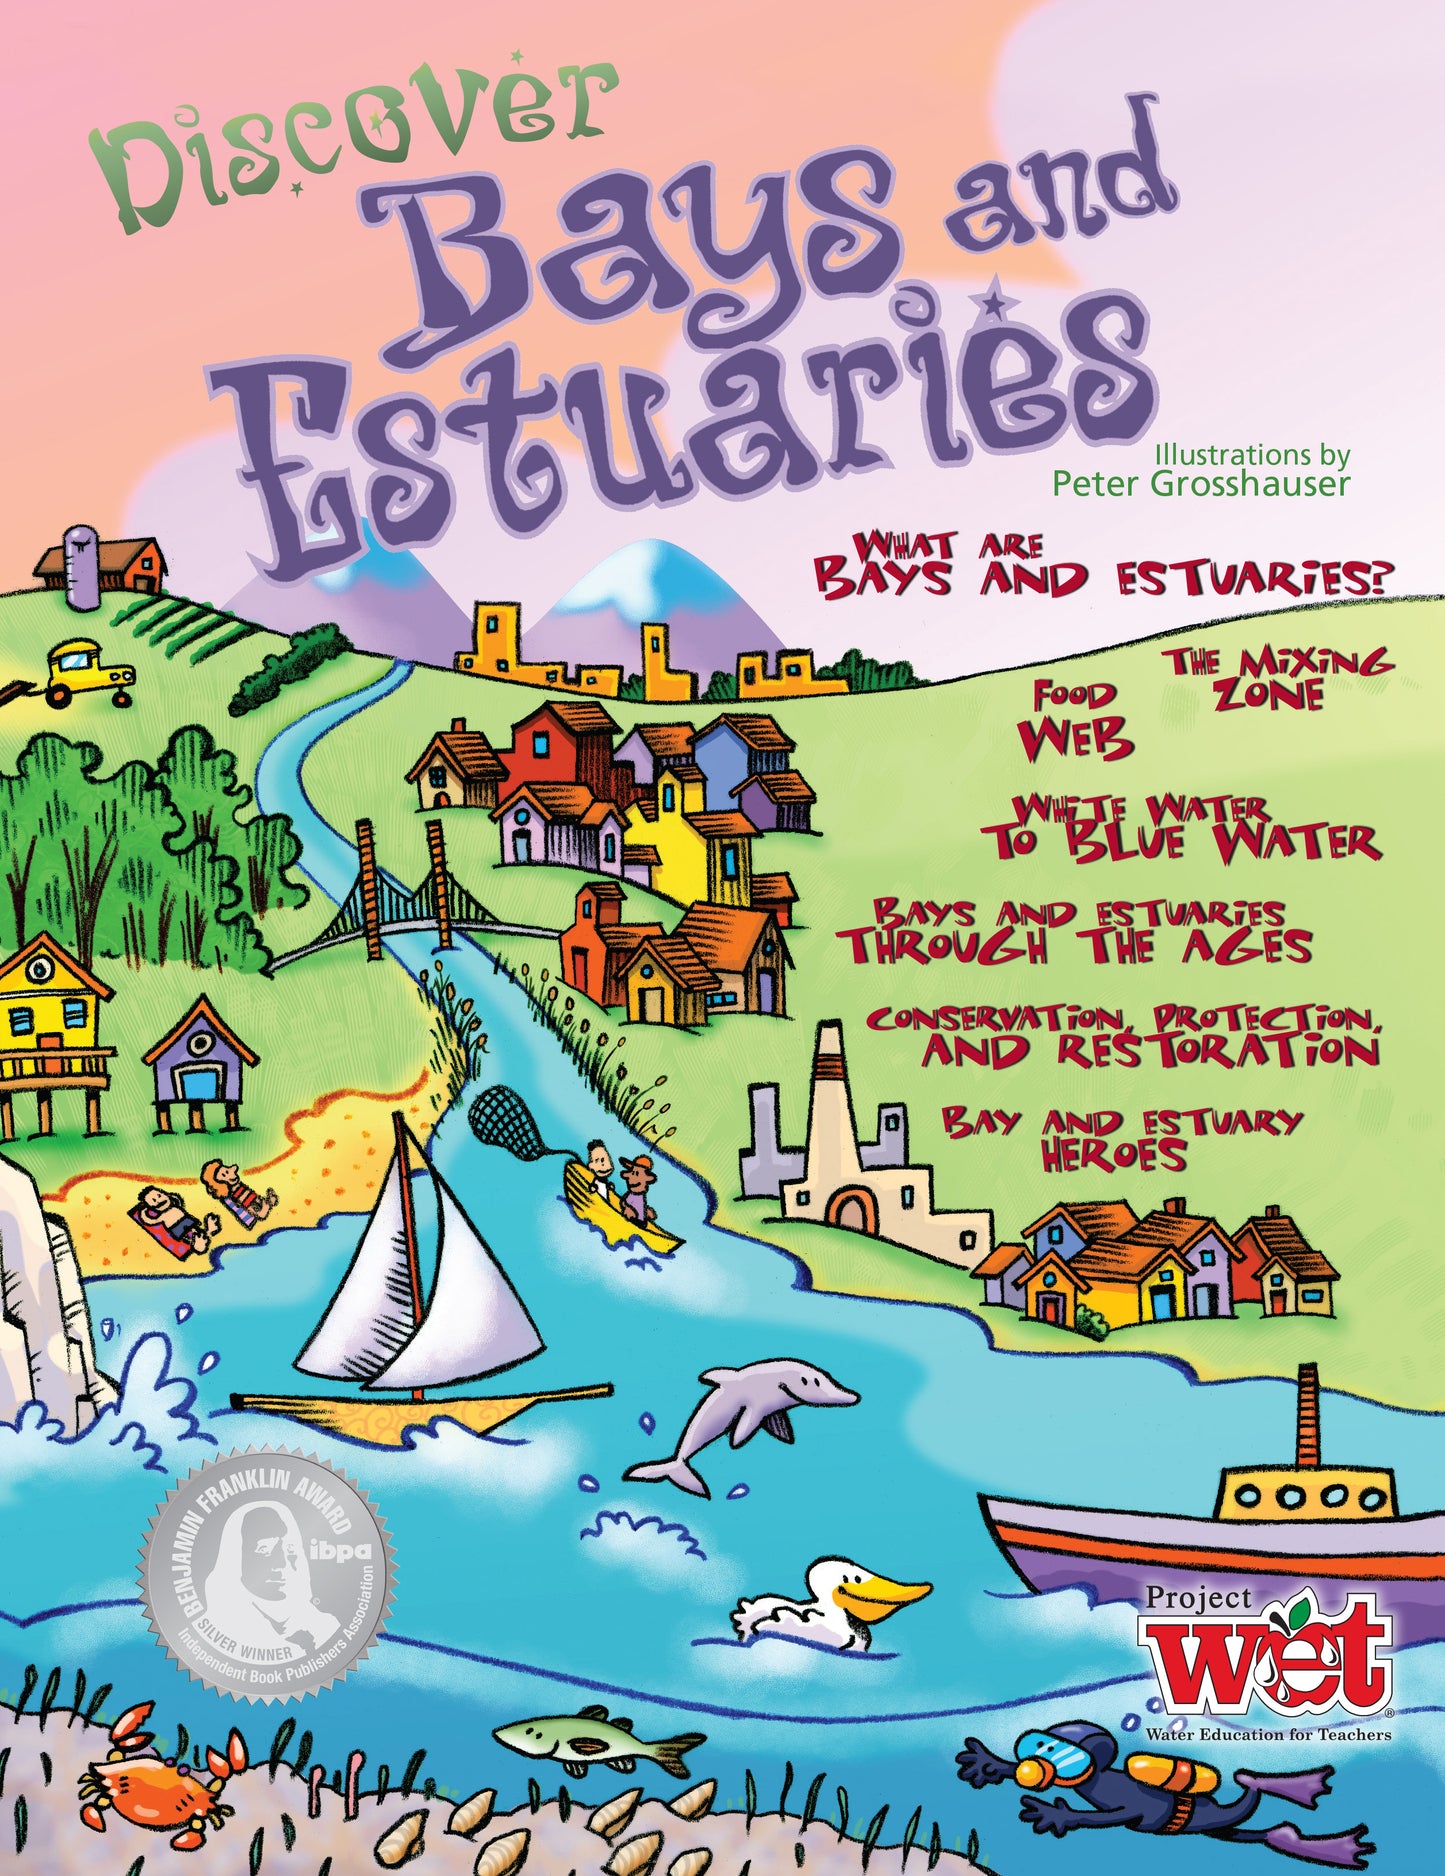 Discover Bays and Estuaries KIDs Activity Booklet